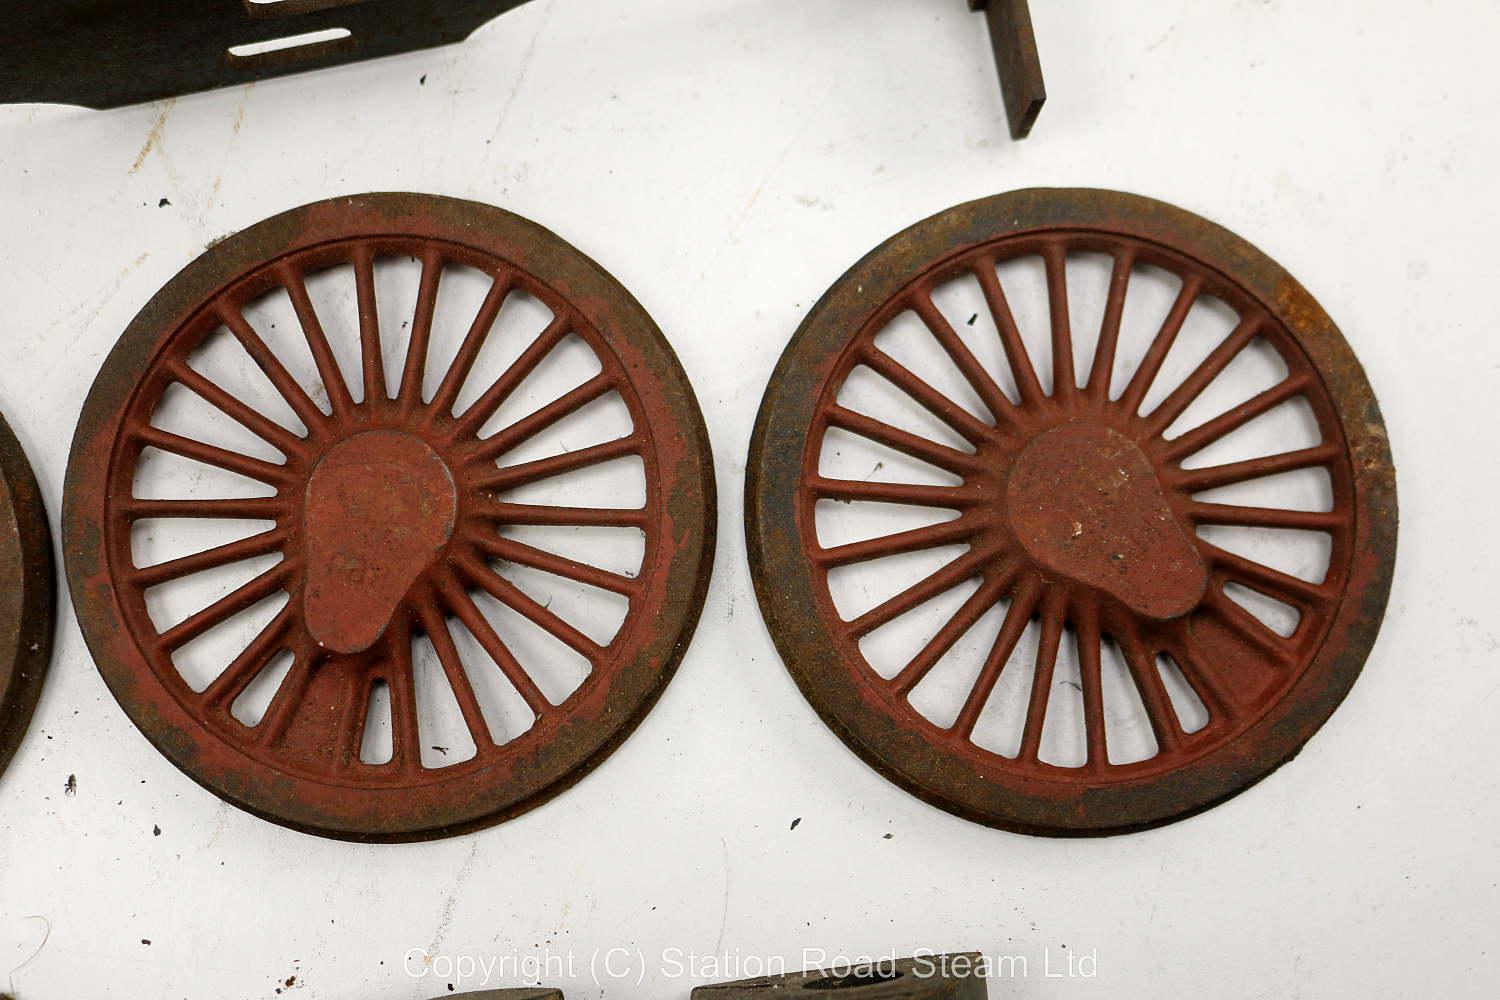 3 1/2 inch gauge GWR King castings